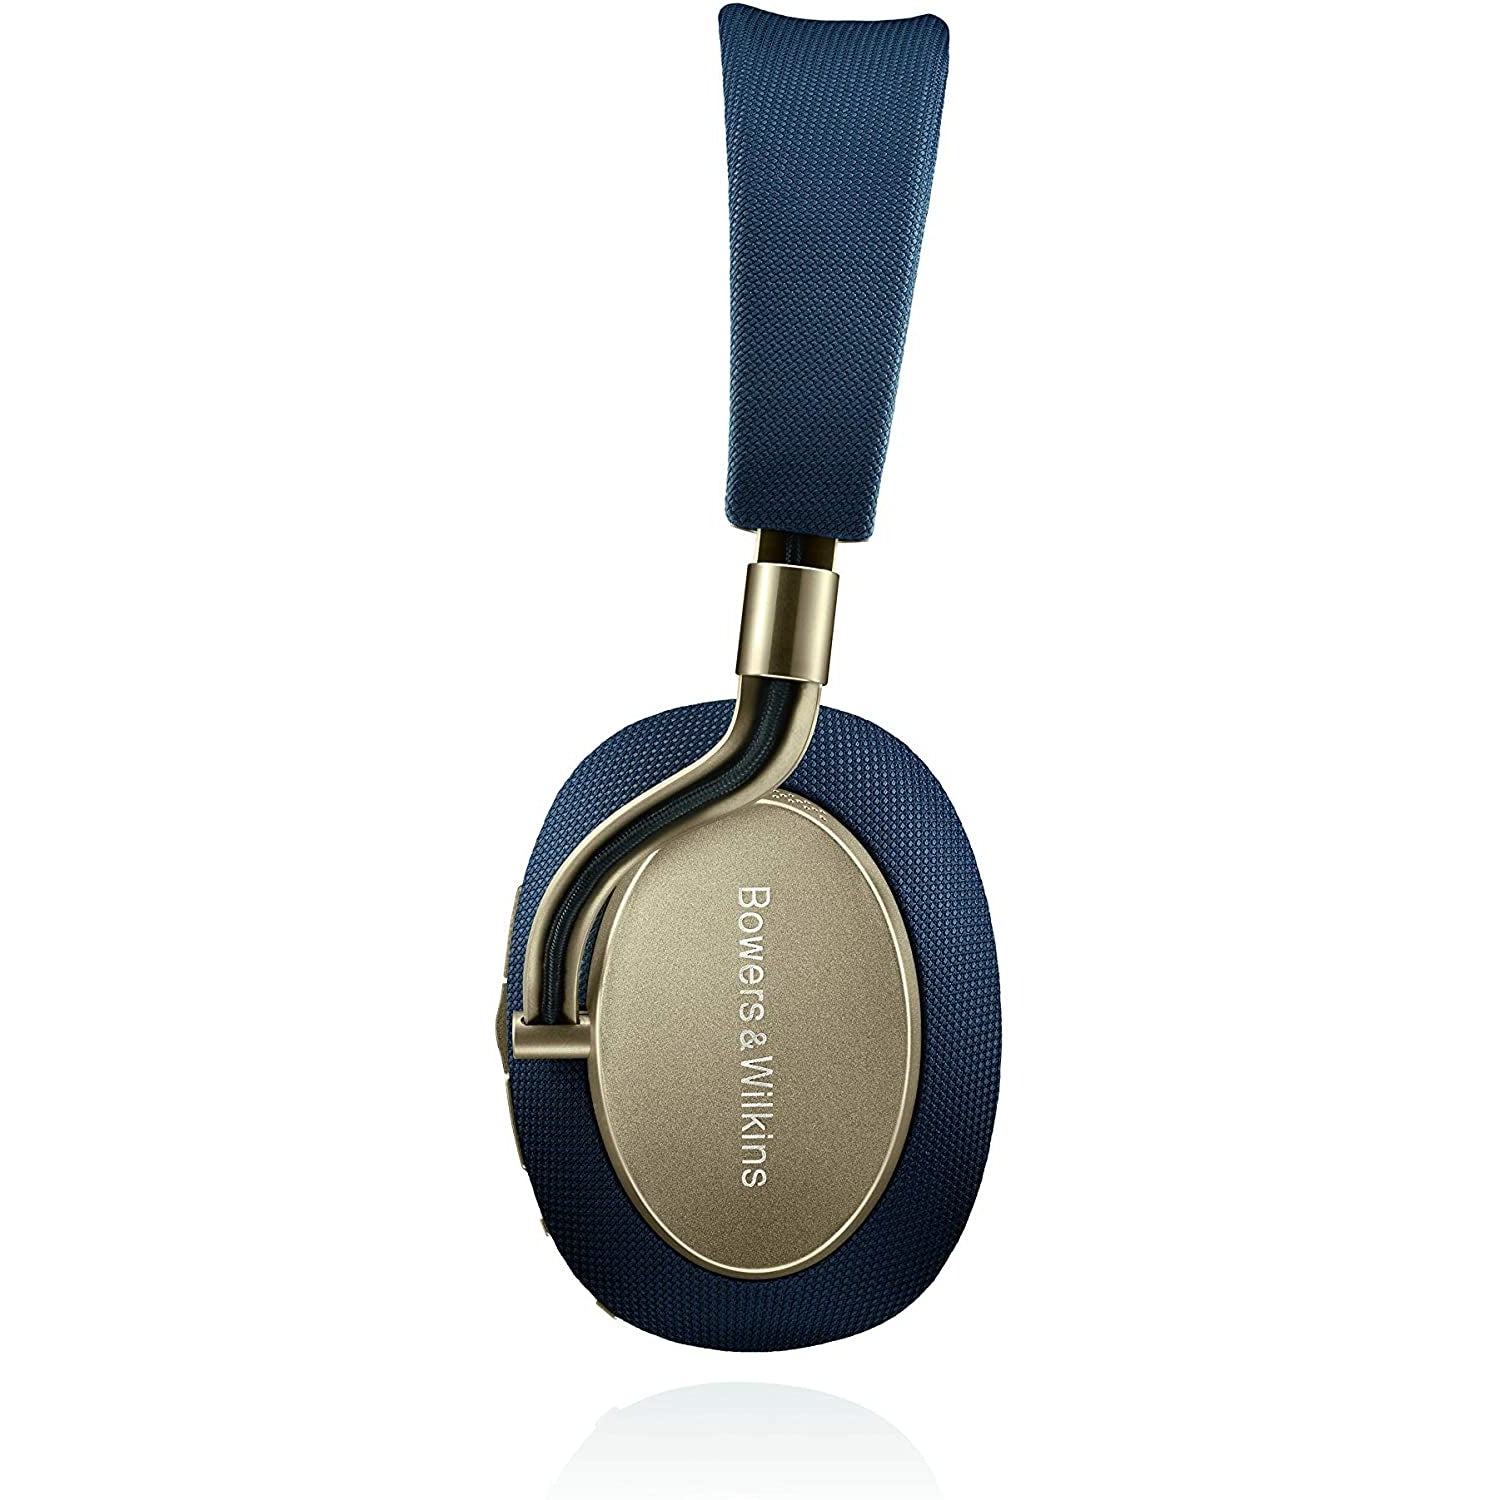 Bowers & Wilkins PX Noise Cancelling Wireless Headphones, Soft Gold - Grade B